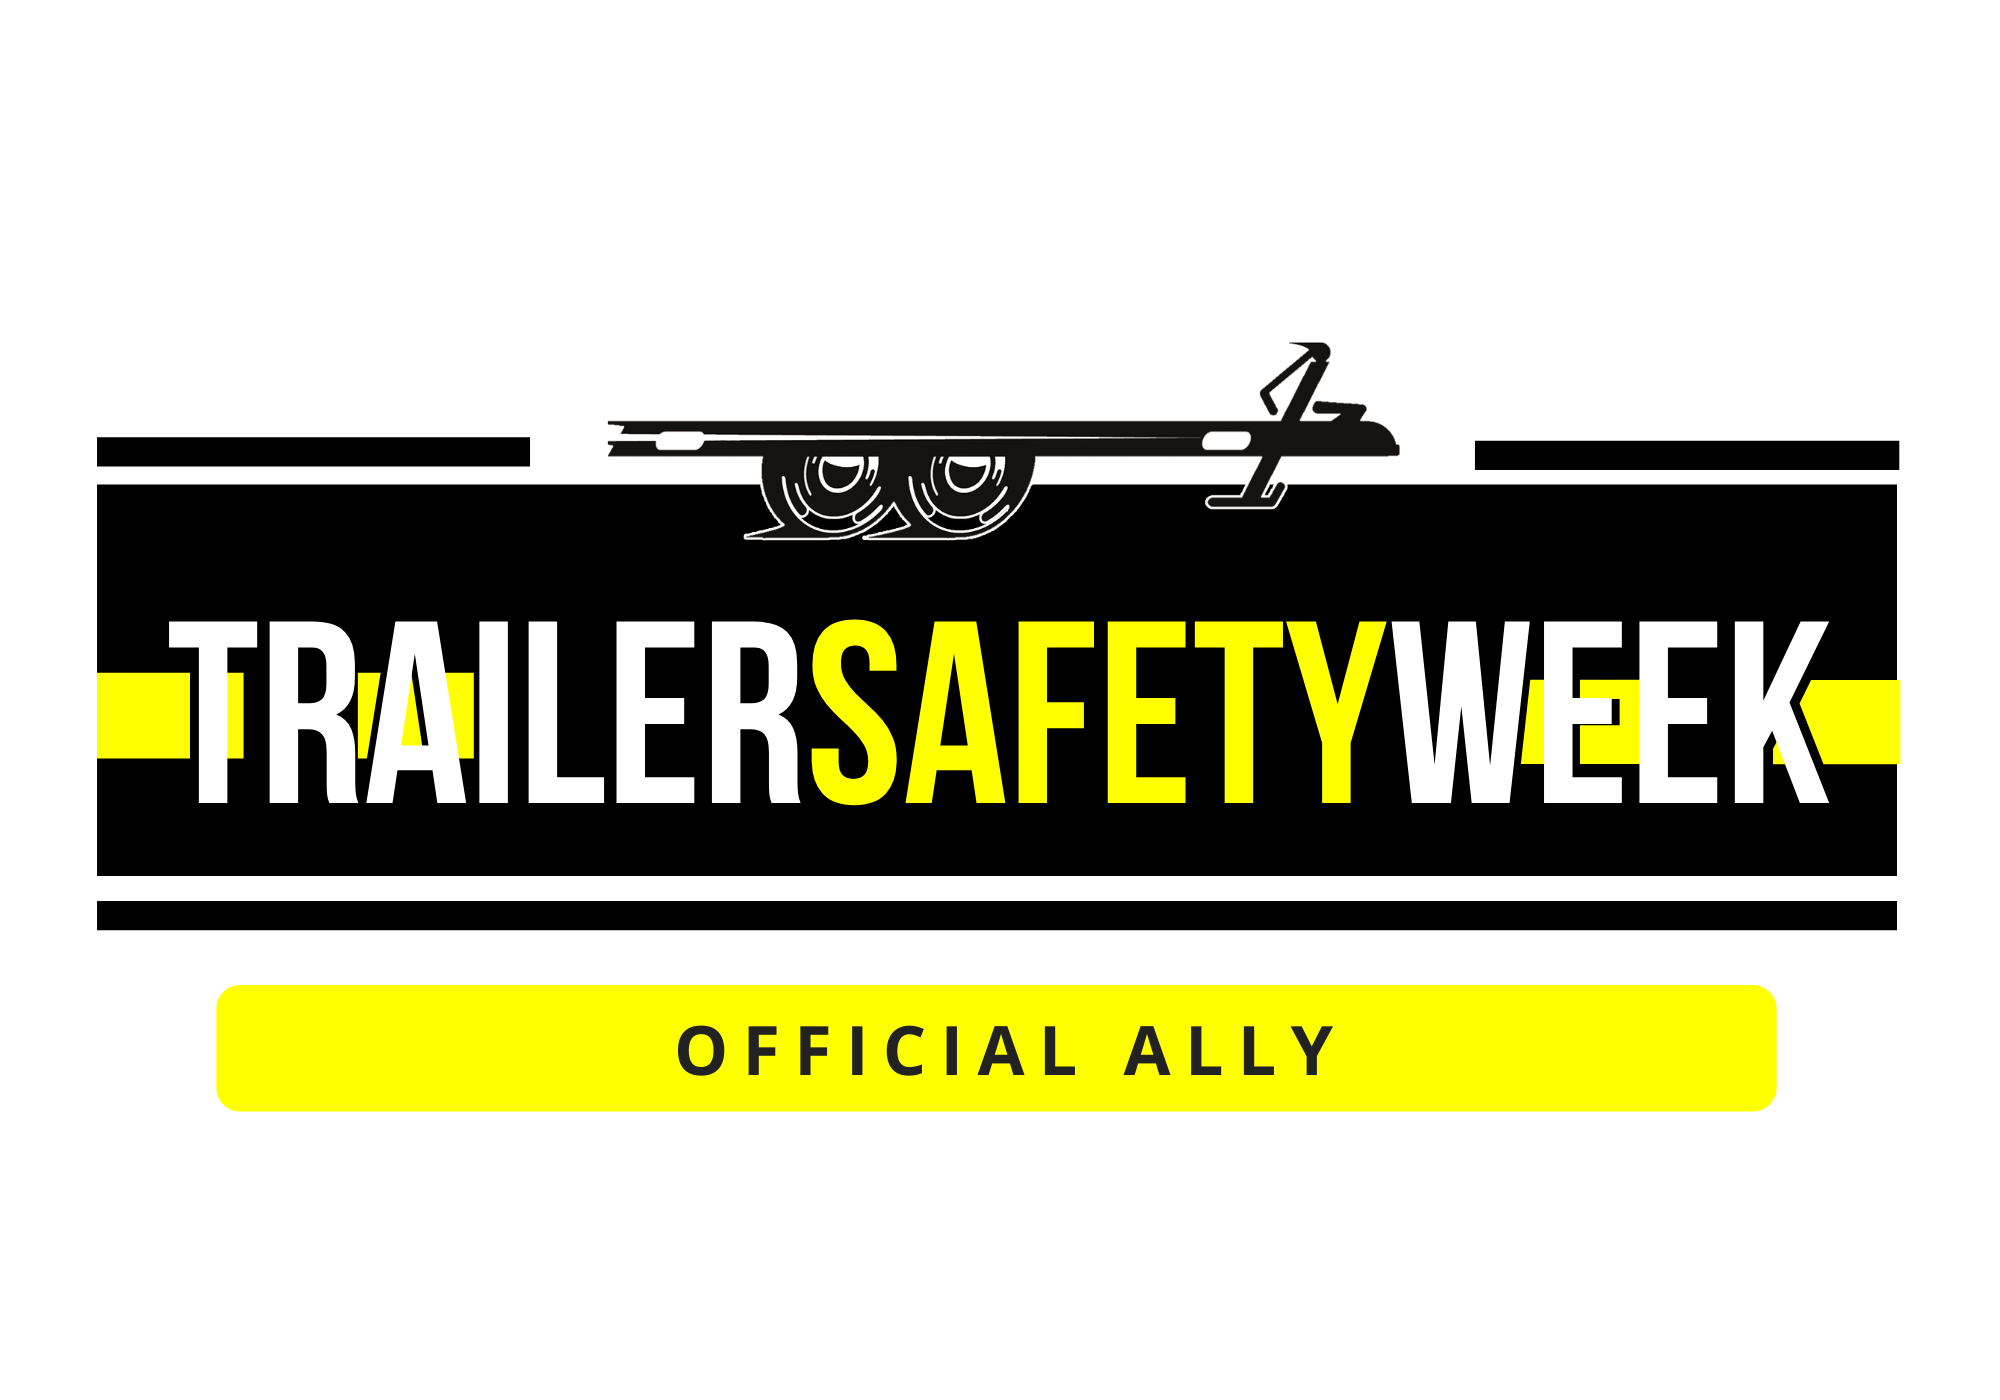 Trailer Safety Week – Making Roadways Safer One Trailer At A Time